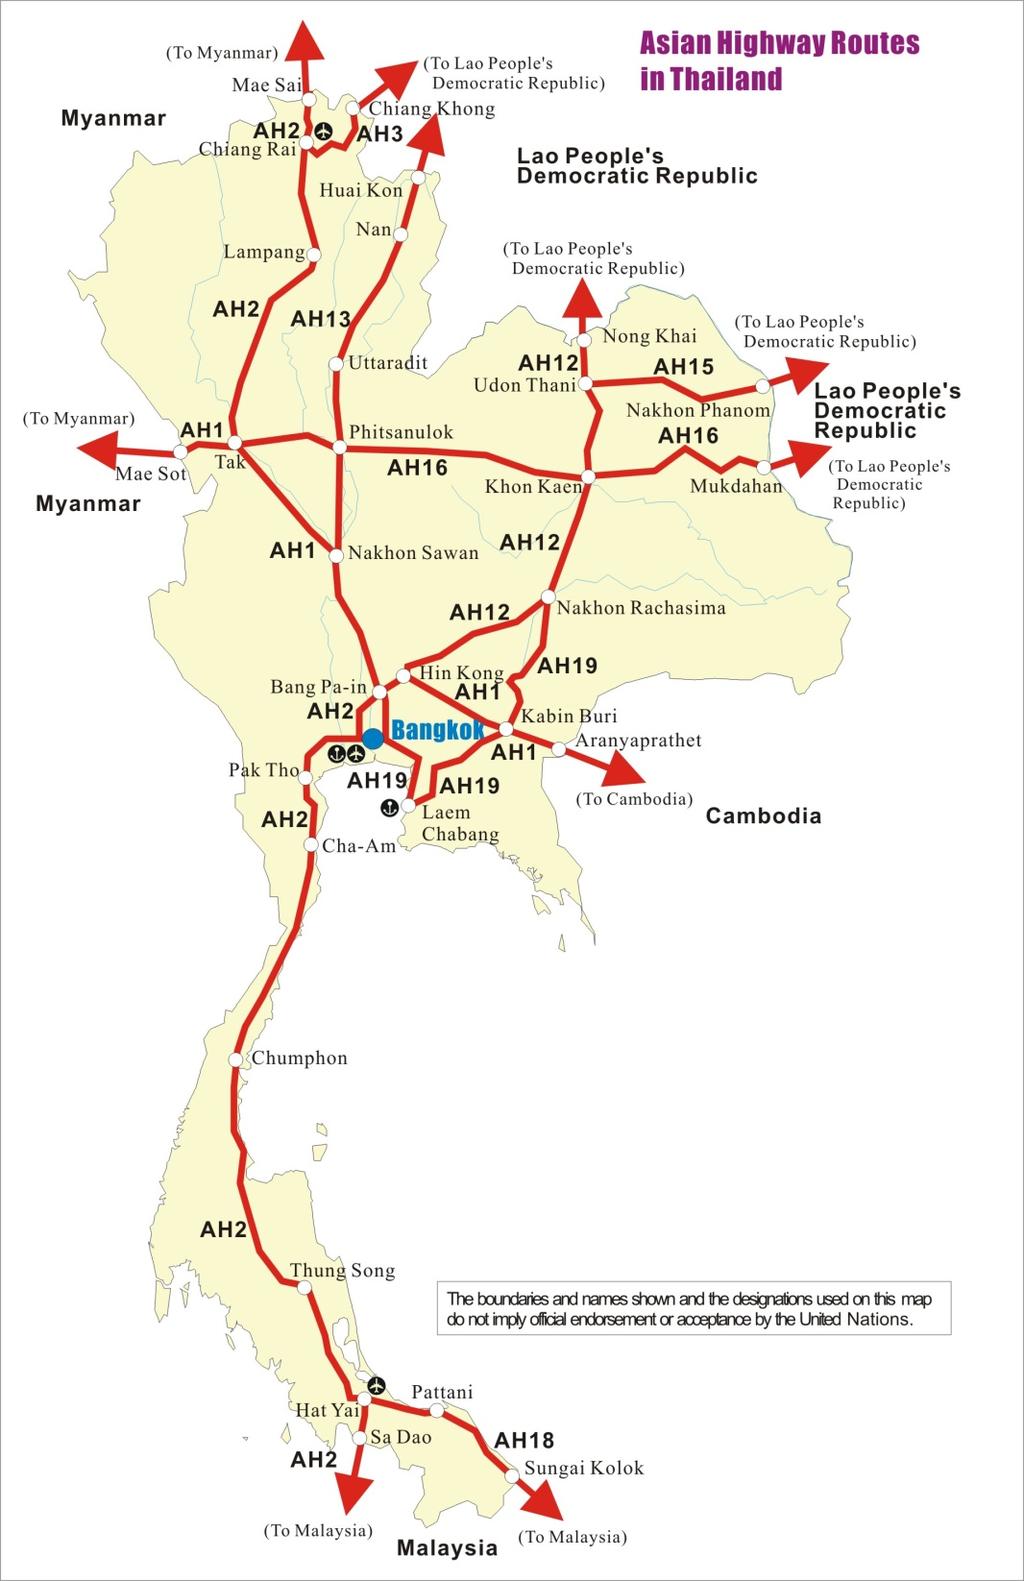 2 1 Asian Highways in Thailand (On-going Projects) AH19: : Bangkok-Laem Chabang-Kabin Buri- Nakhon Ratchasima, 364 Km 1. The 4-lane 4 highway widening project on the National Highway Rt.